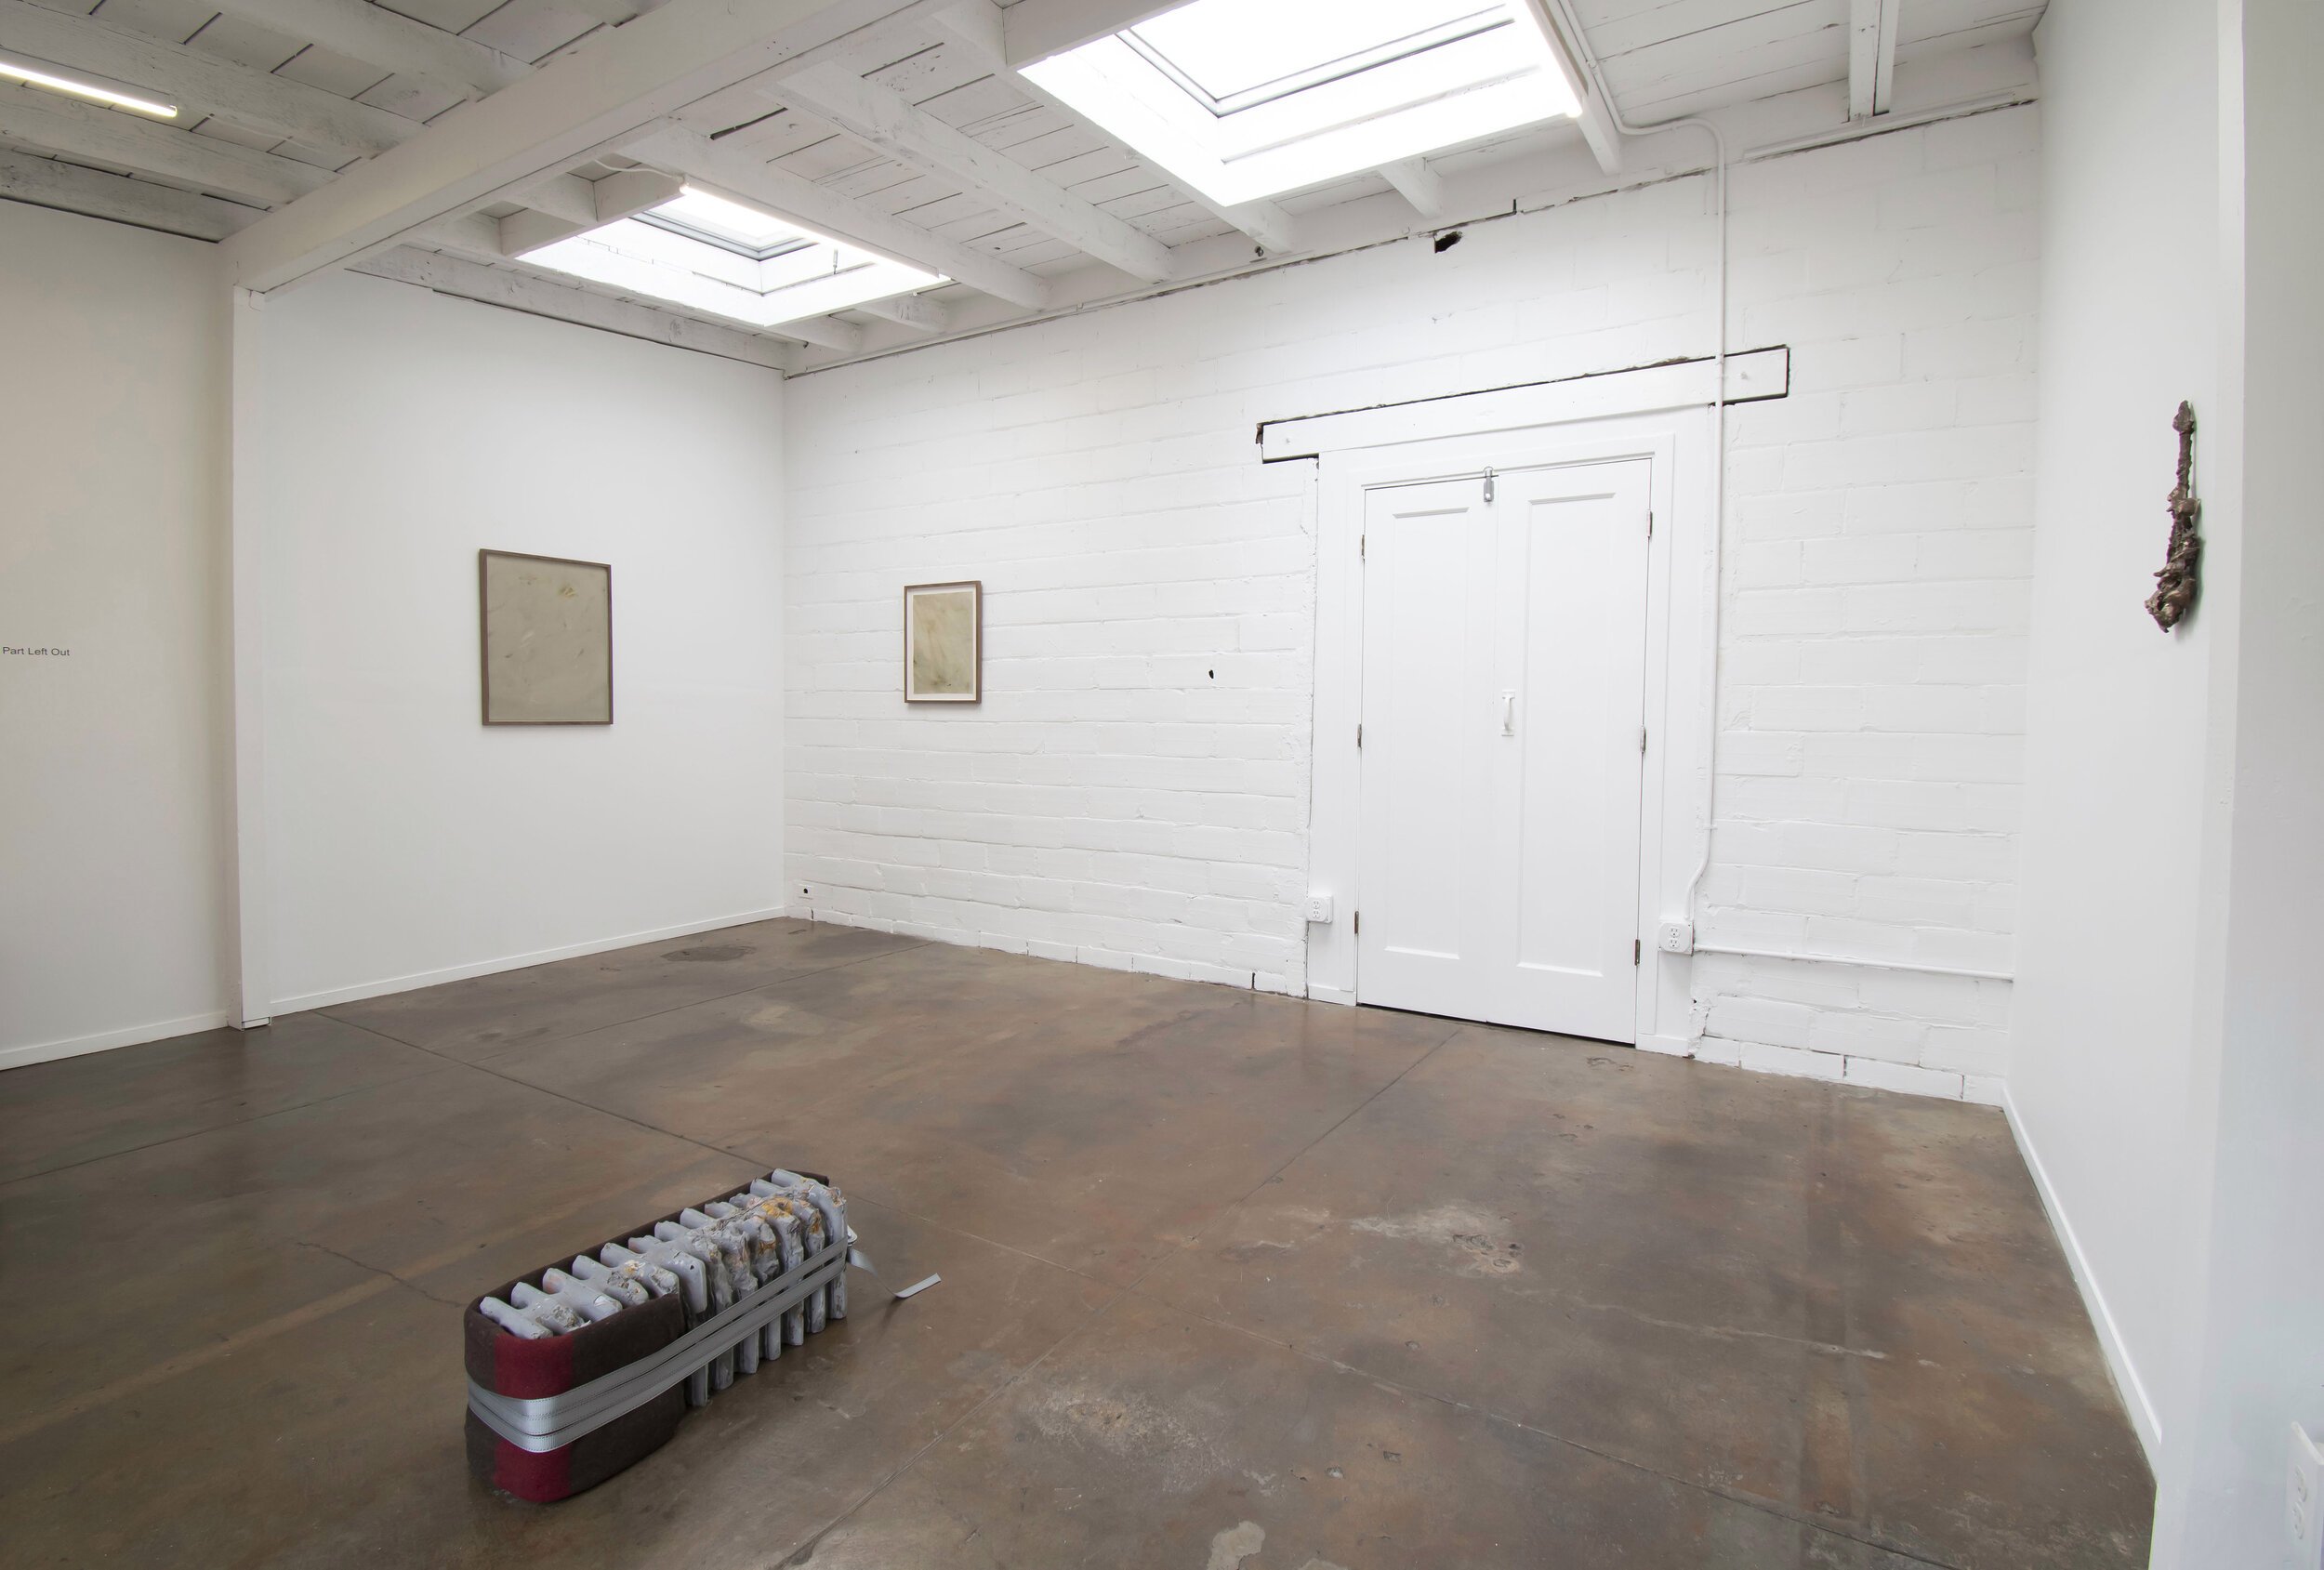   No Part Left Out: Rebeca Bollinger, June Crespo, and Miguel Marina,  exhibition view, 2020 